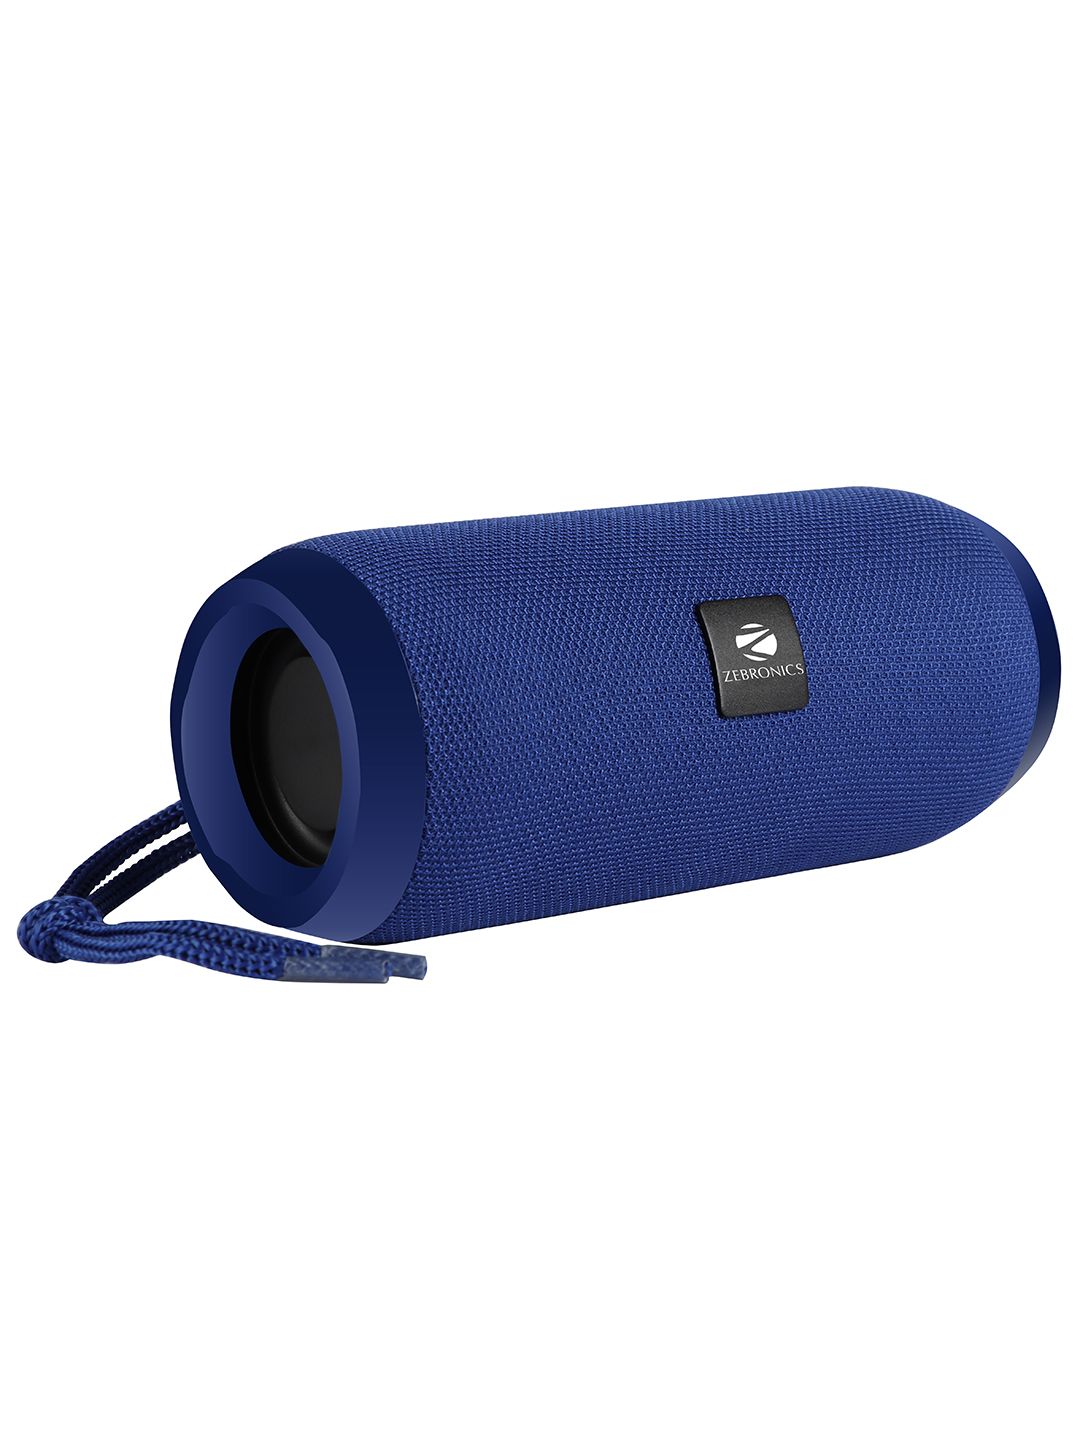 ZEBRONICS Zeb-Action Portable BT Speaker with TWS Function - Blue Price in India